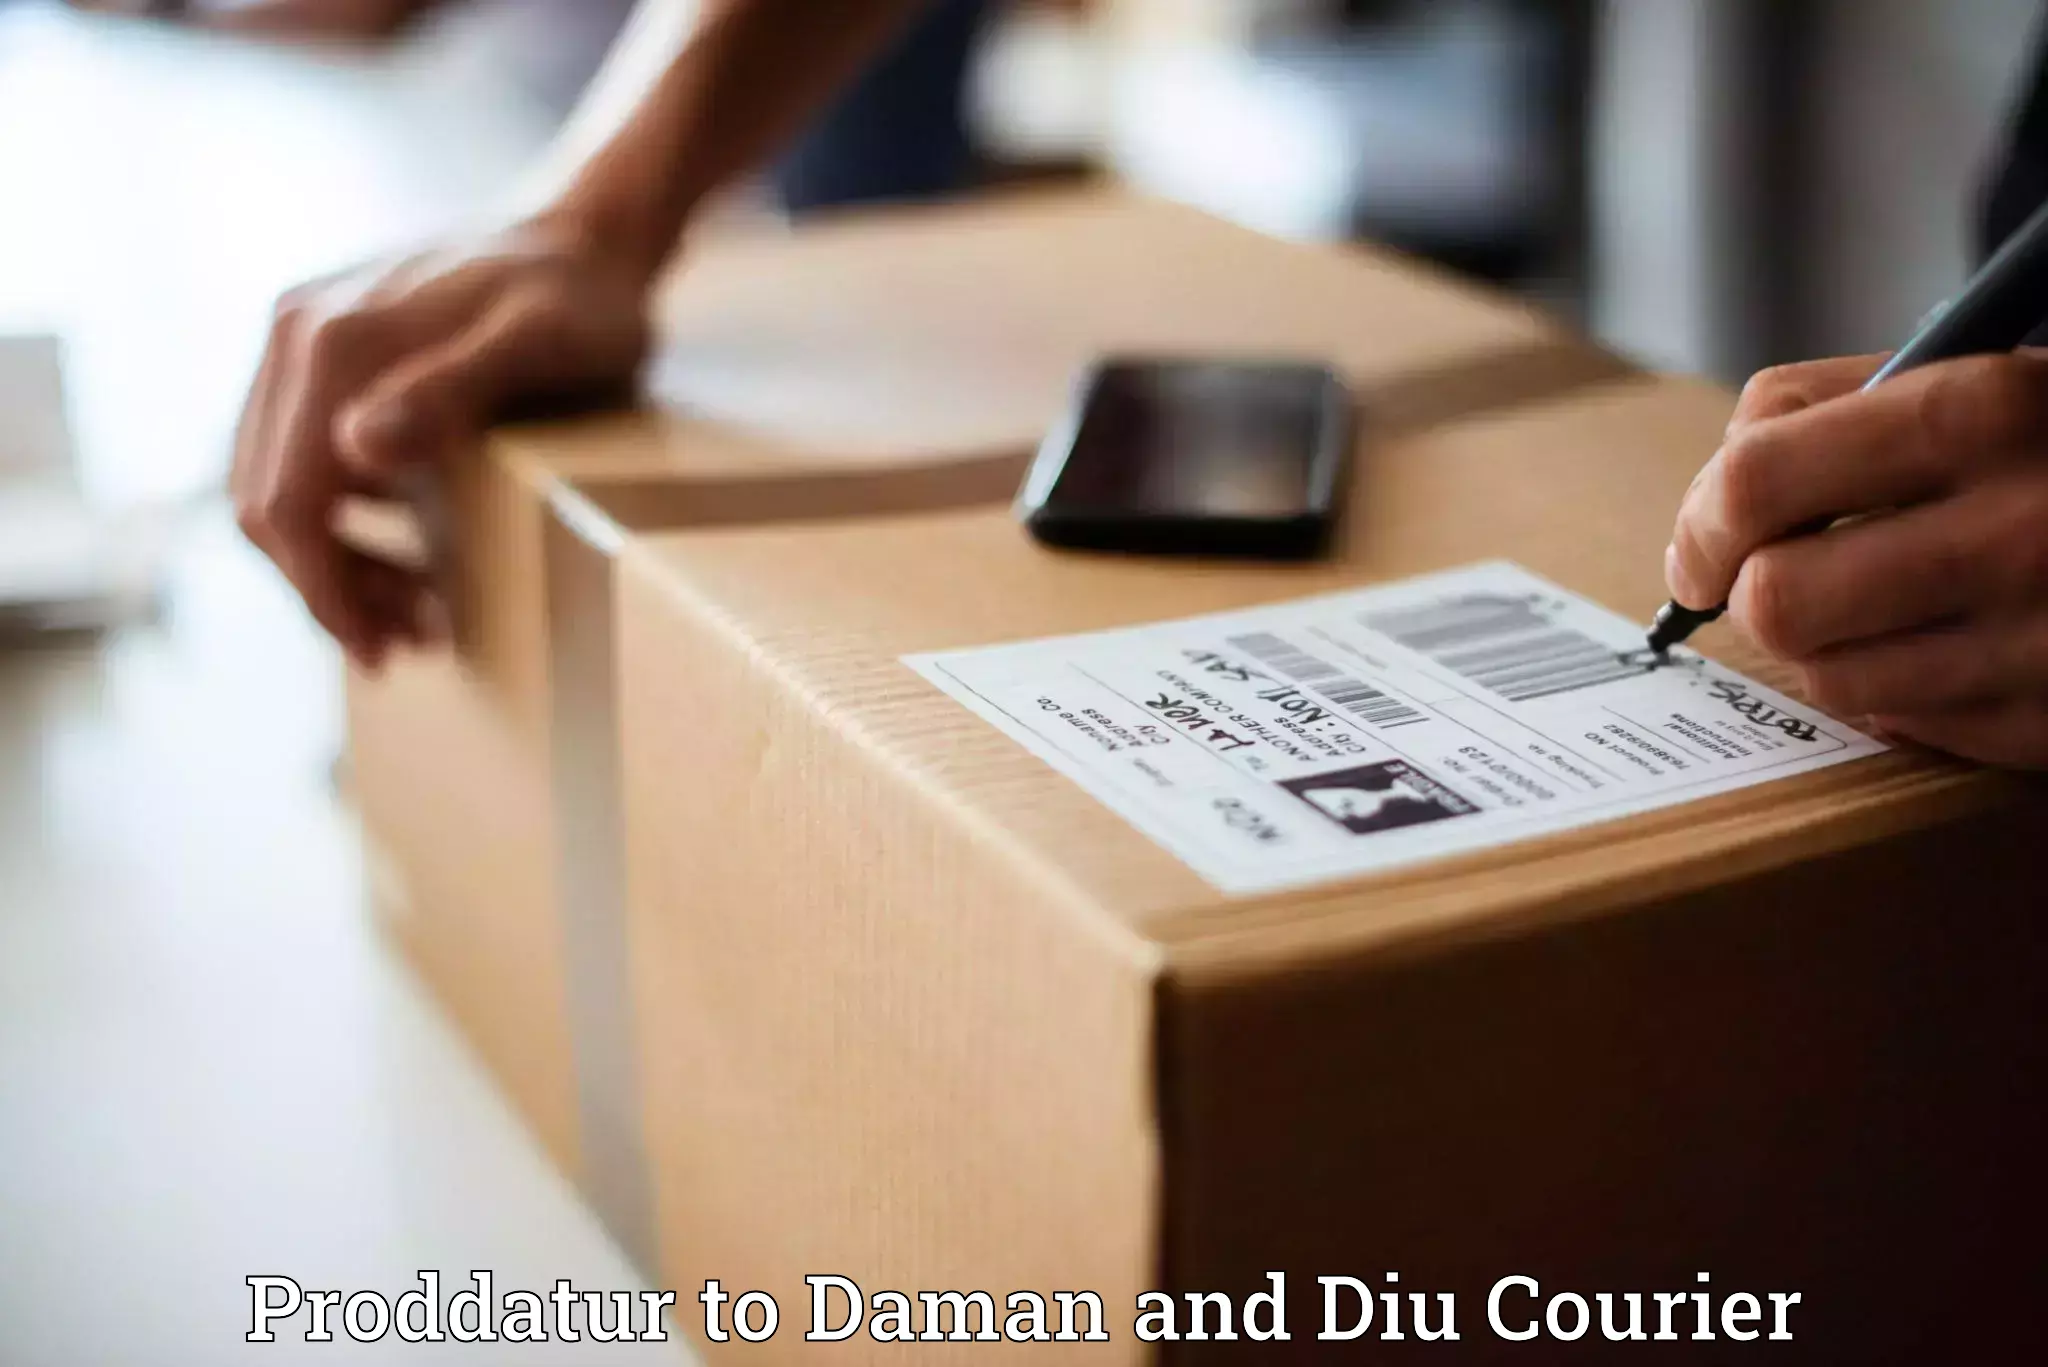 Comprehensive shipping network Proddatur to Daman and Diu